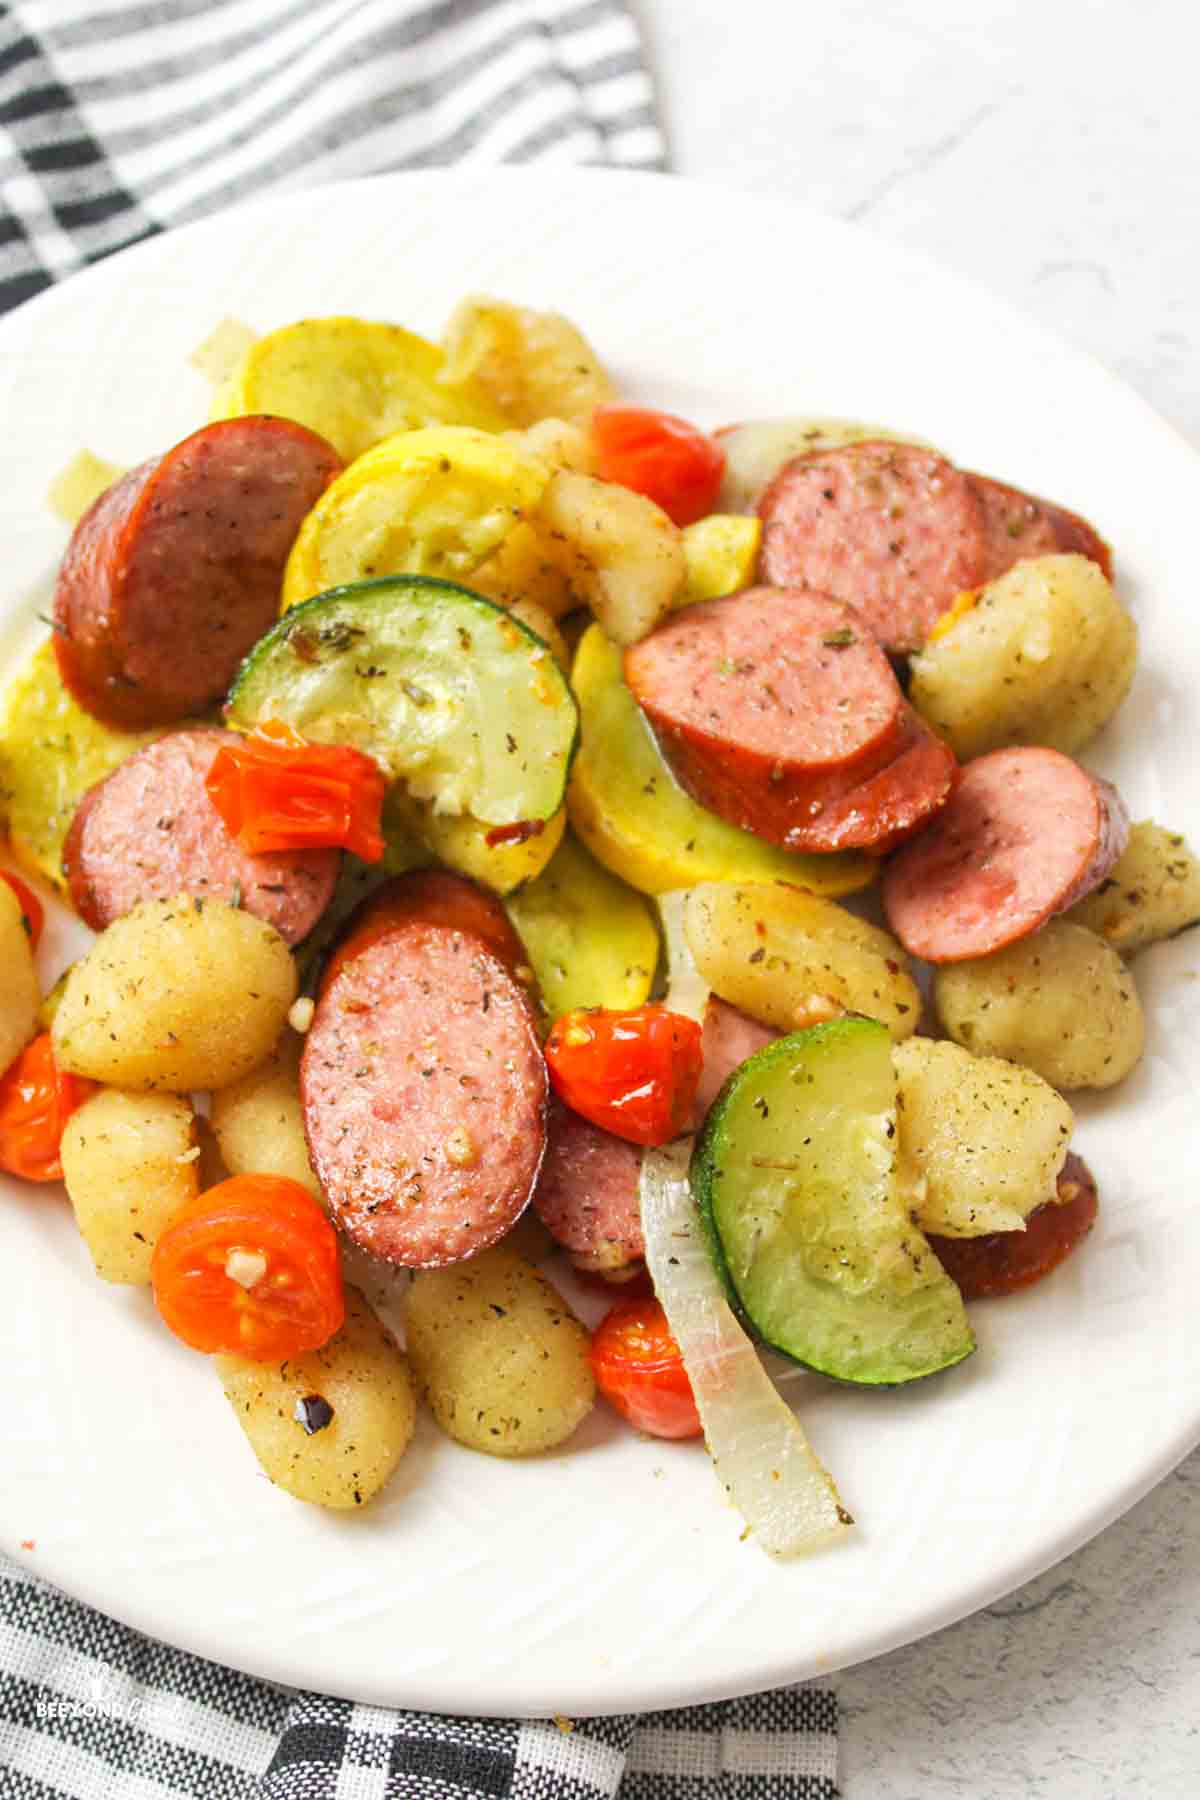 a dinner plate filled with gnocchi with sausage and vegetables